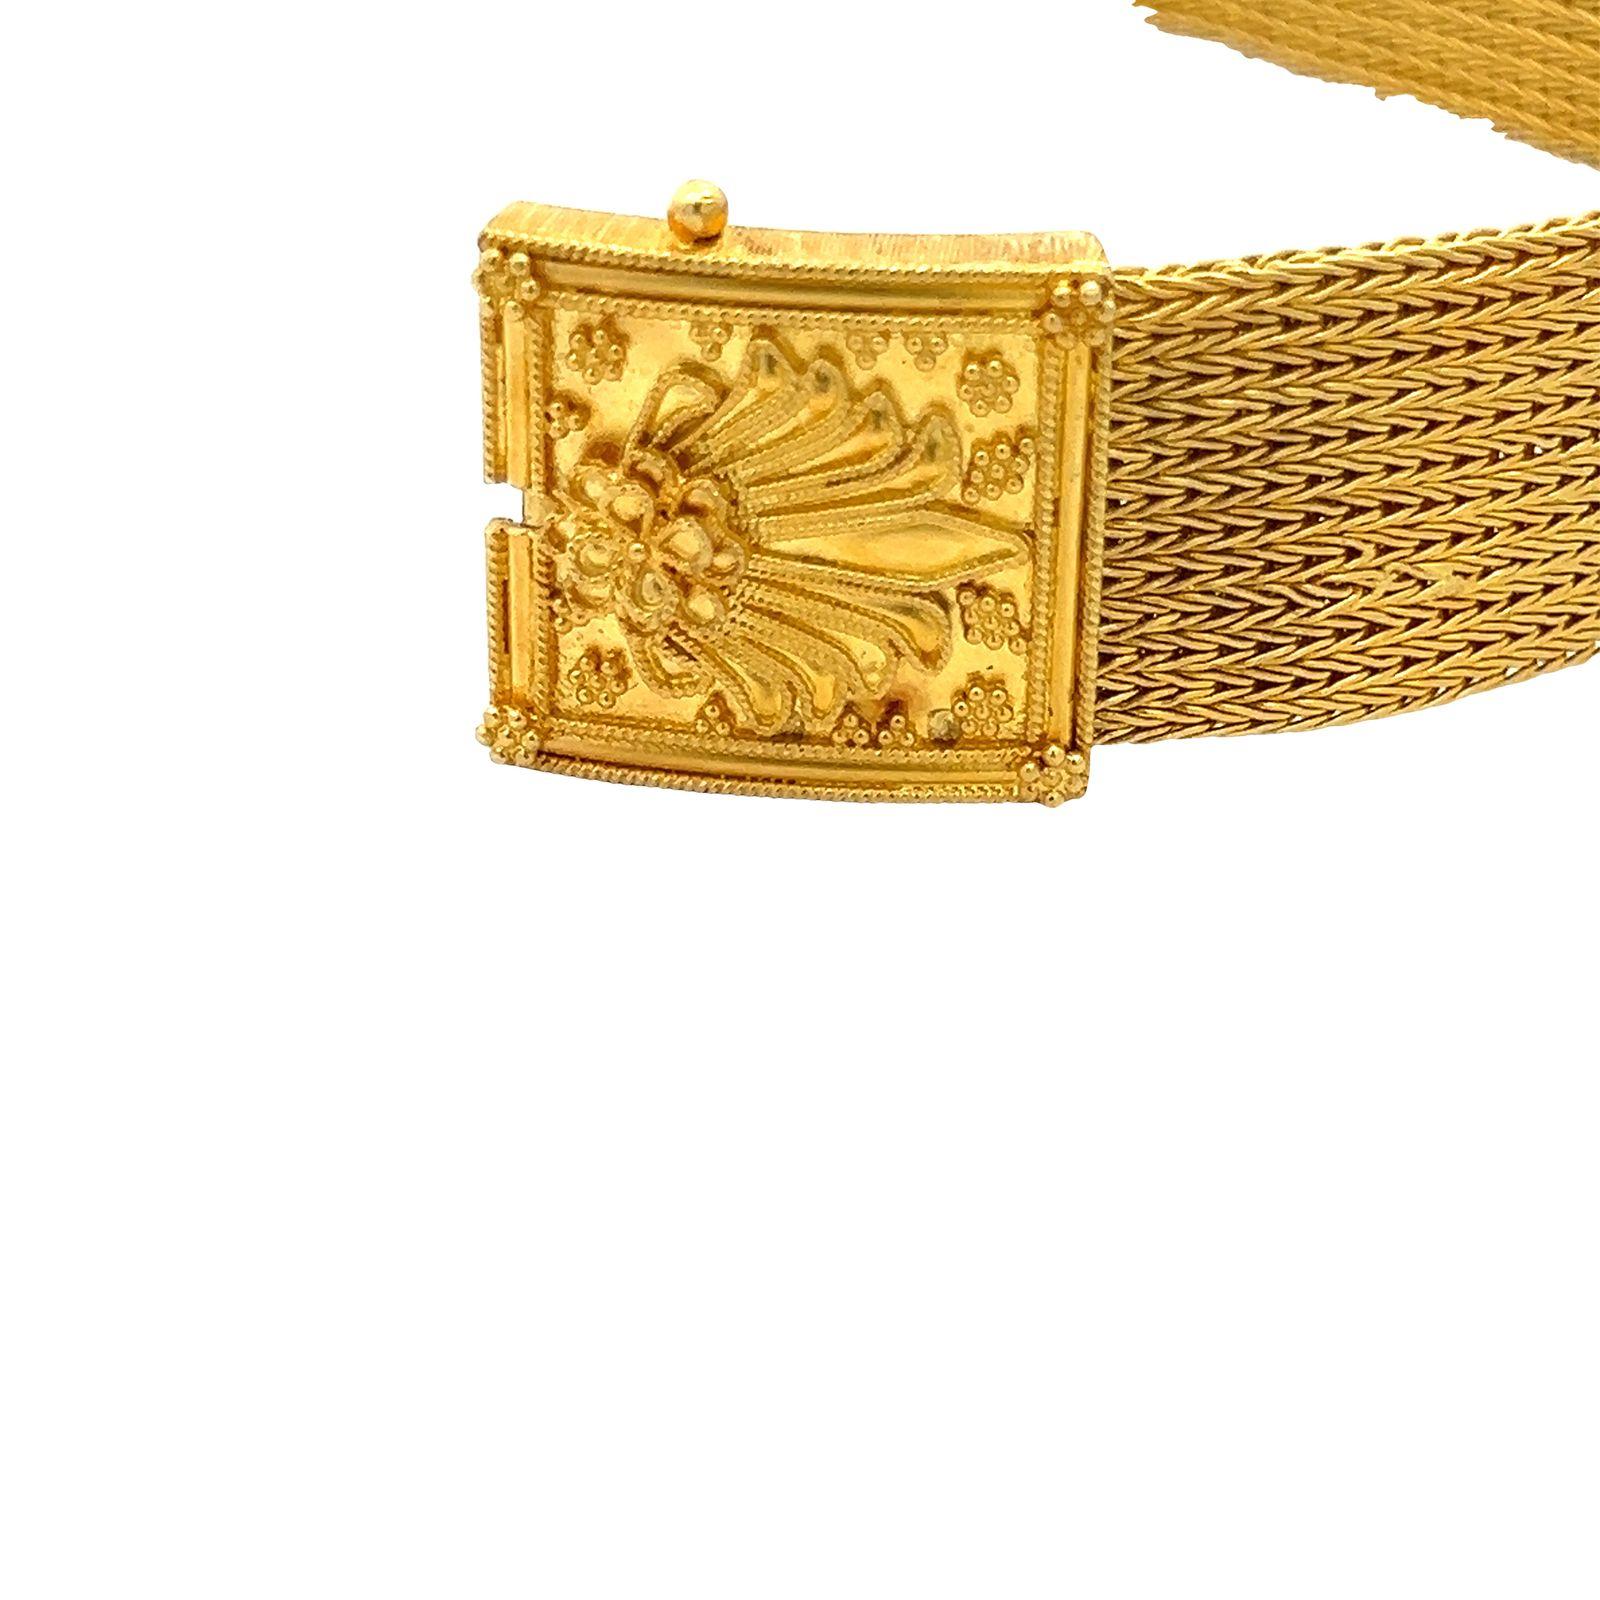  LALAoUNIS Vintage Yellow Gold Woven Bracelet In Excellent Condition For Sale In Beverly Hills, CA